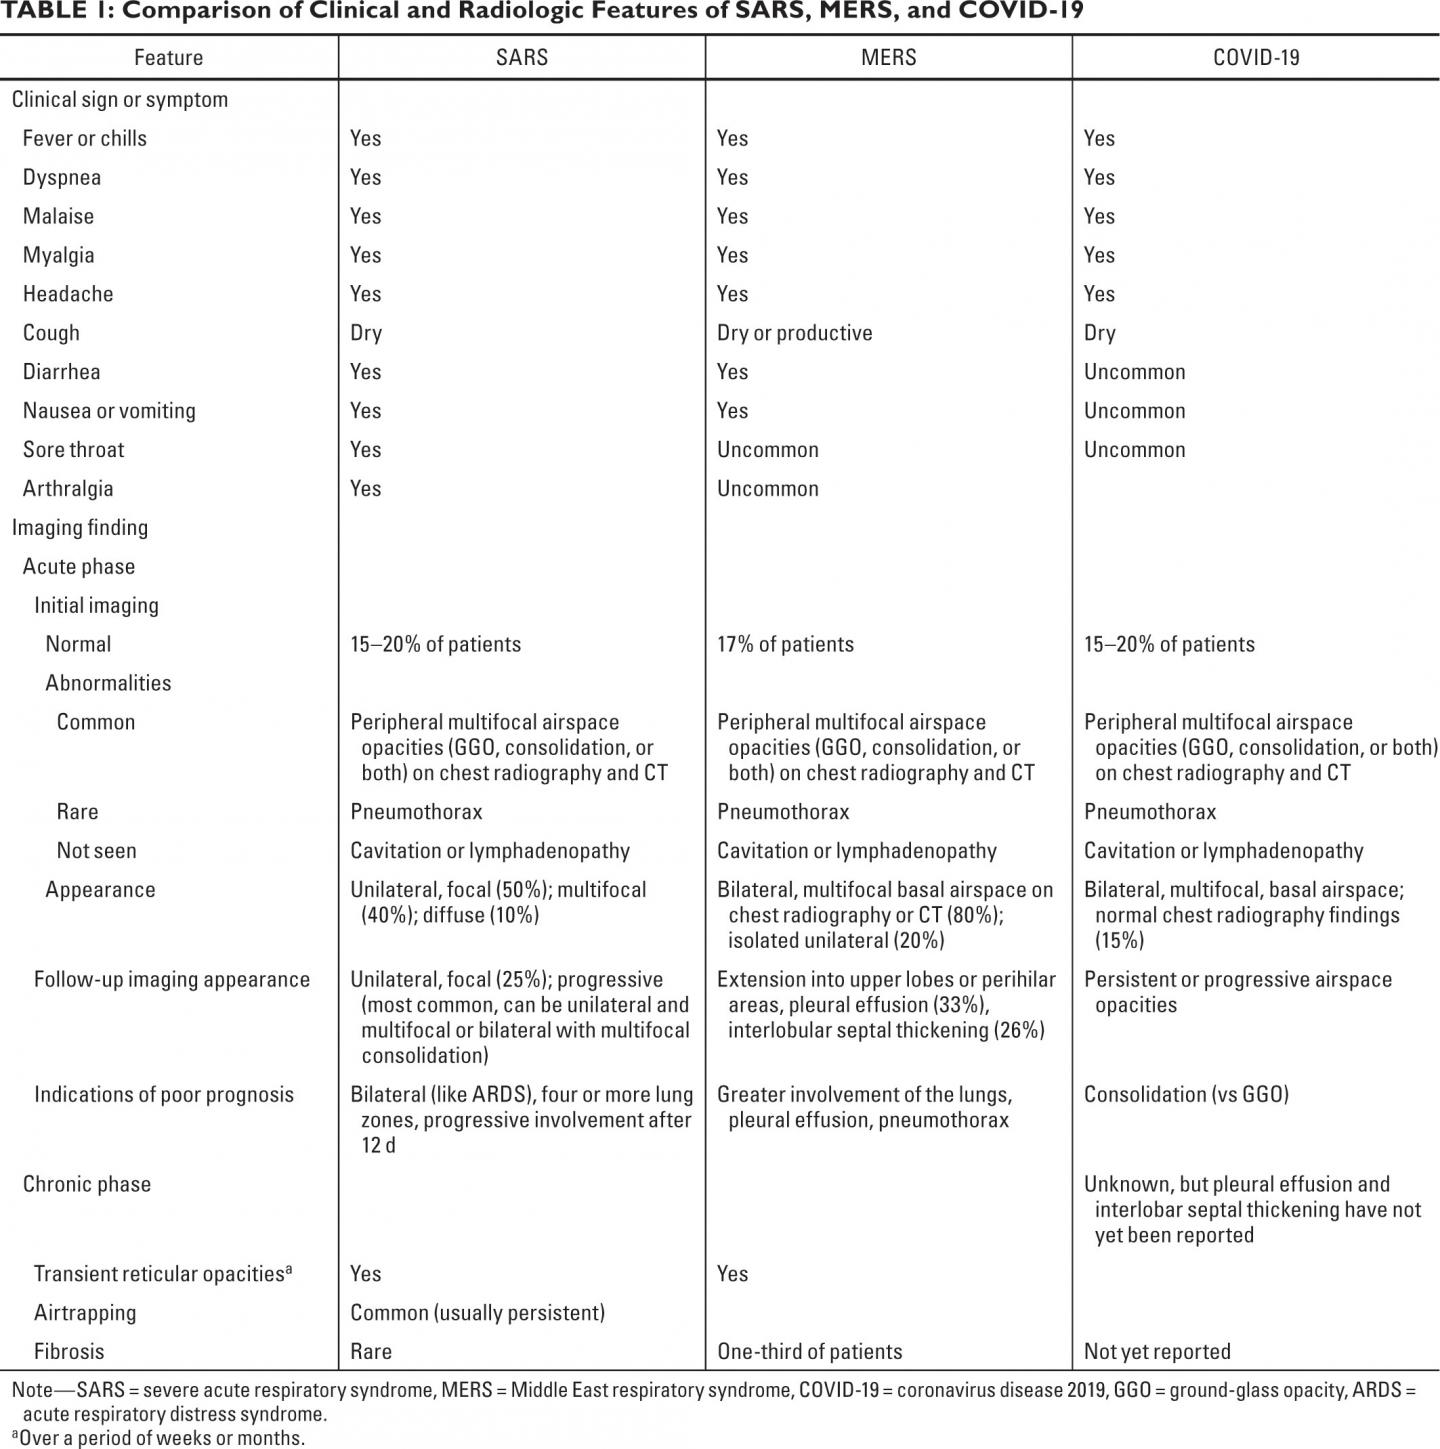 Comparison of Clinical and Radiologic Features of SARS, MERS, and COVID-19